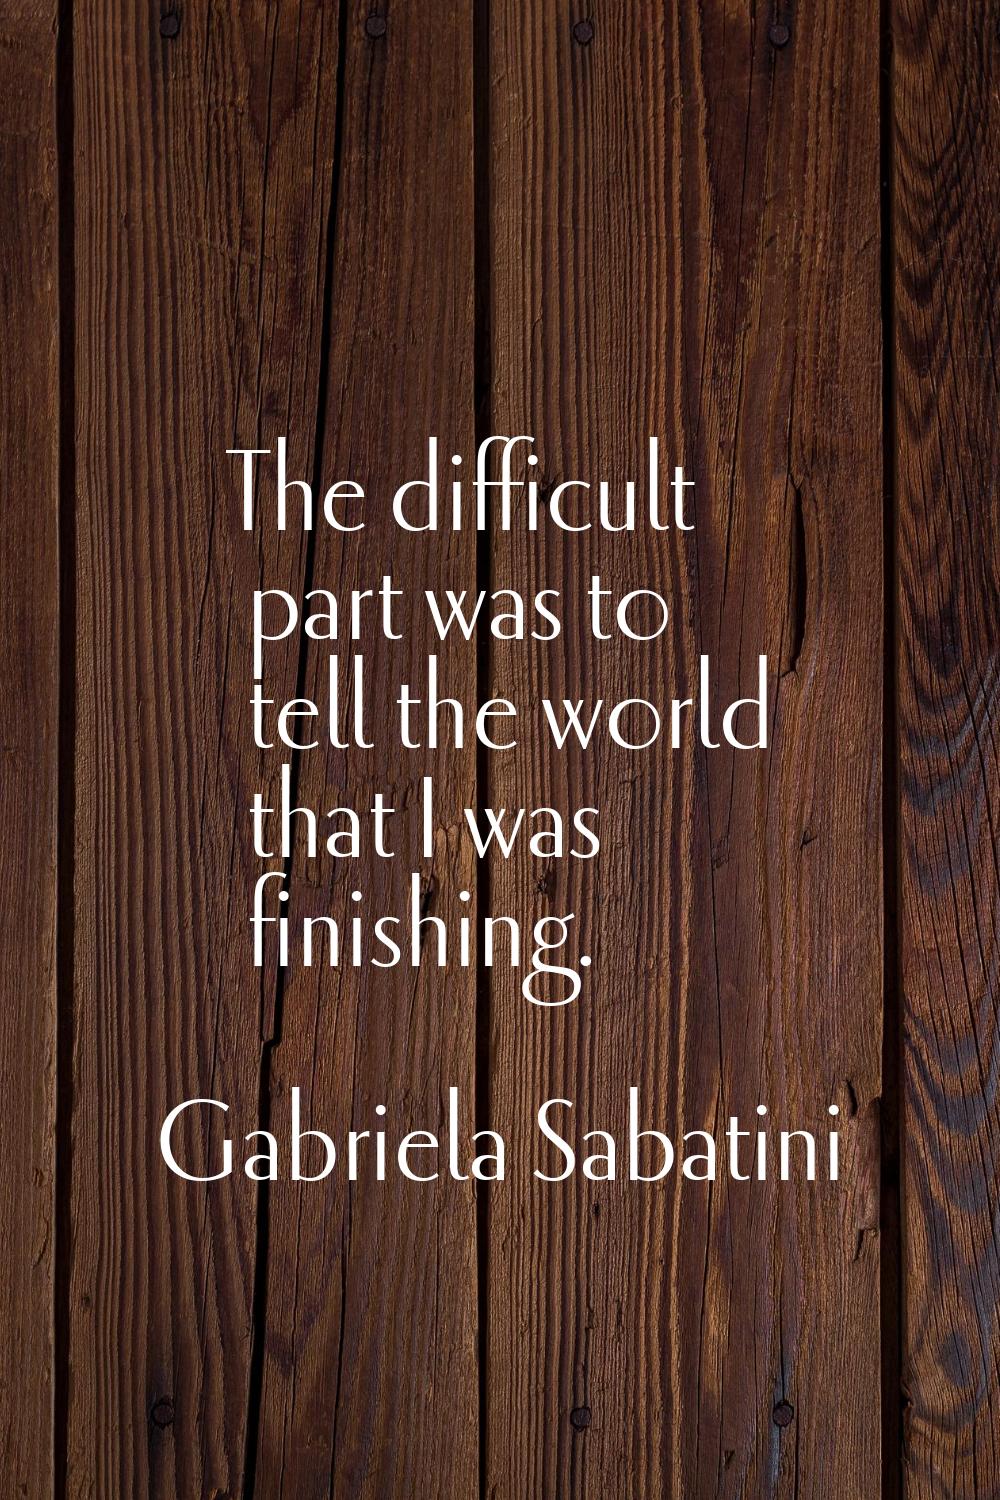 The difficult part was to tell the world that I was finishing.